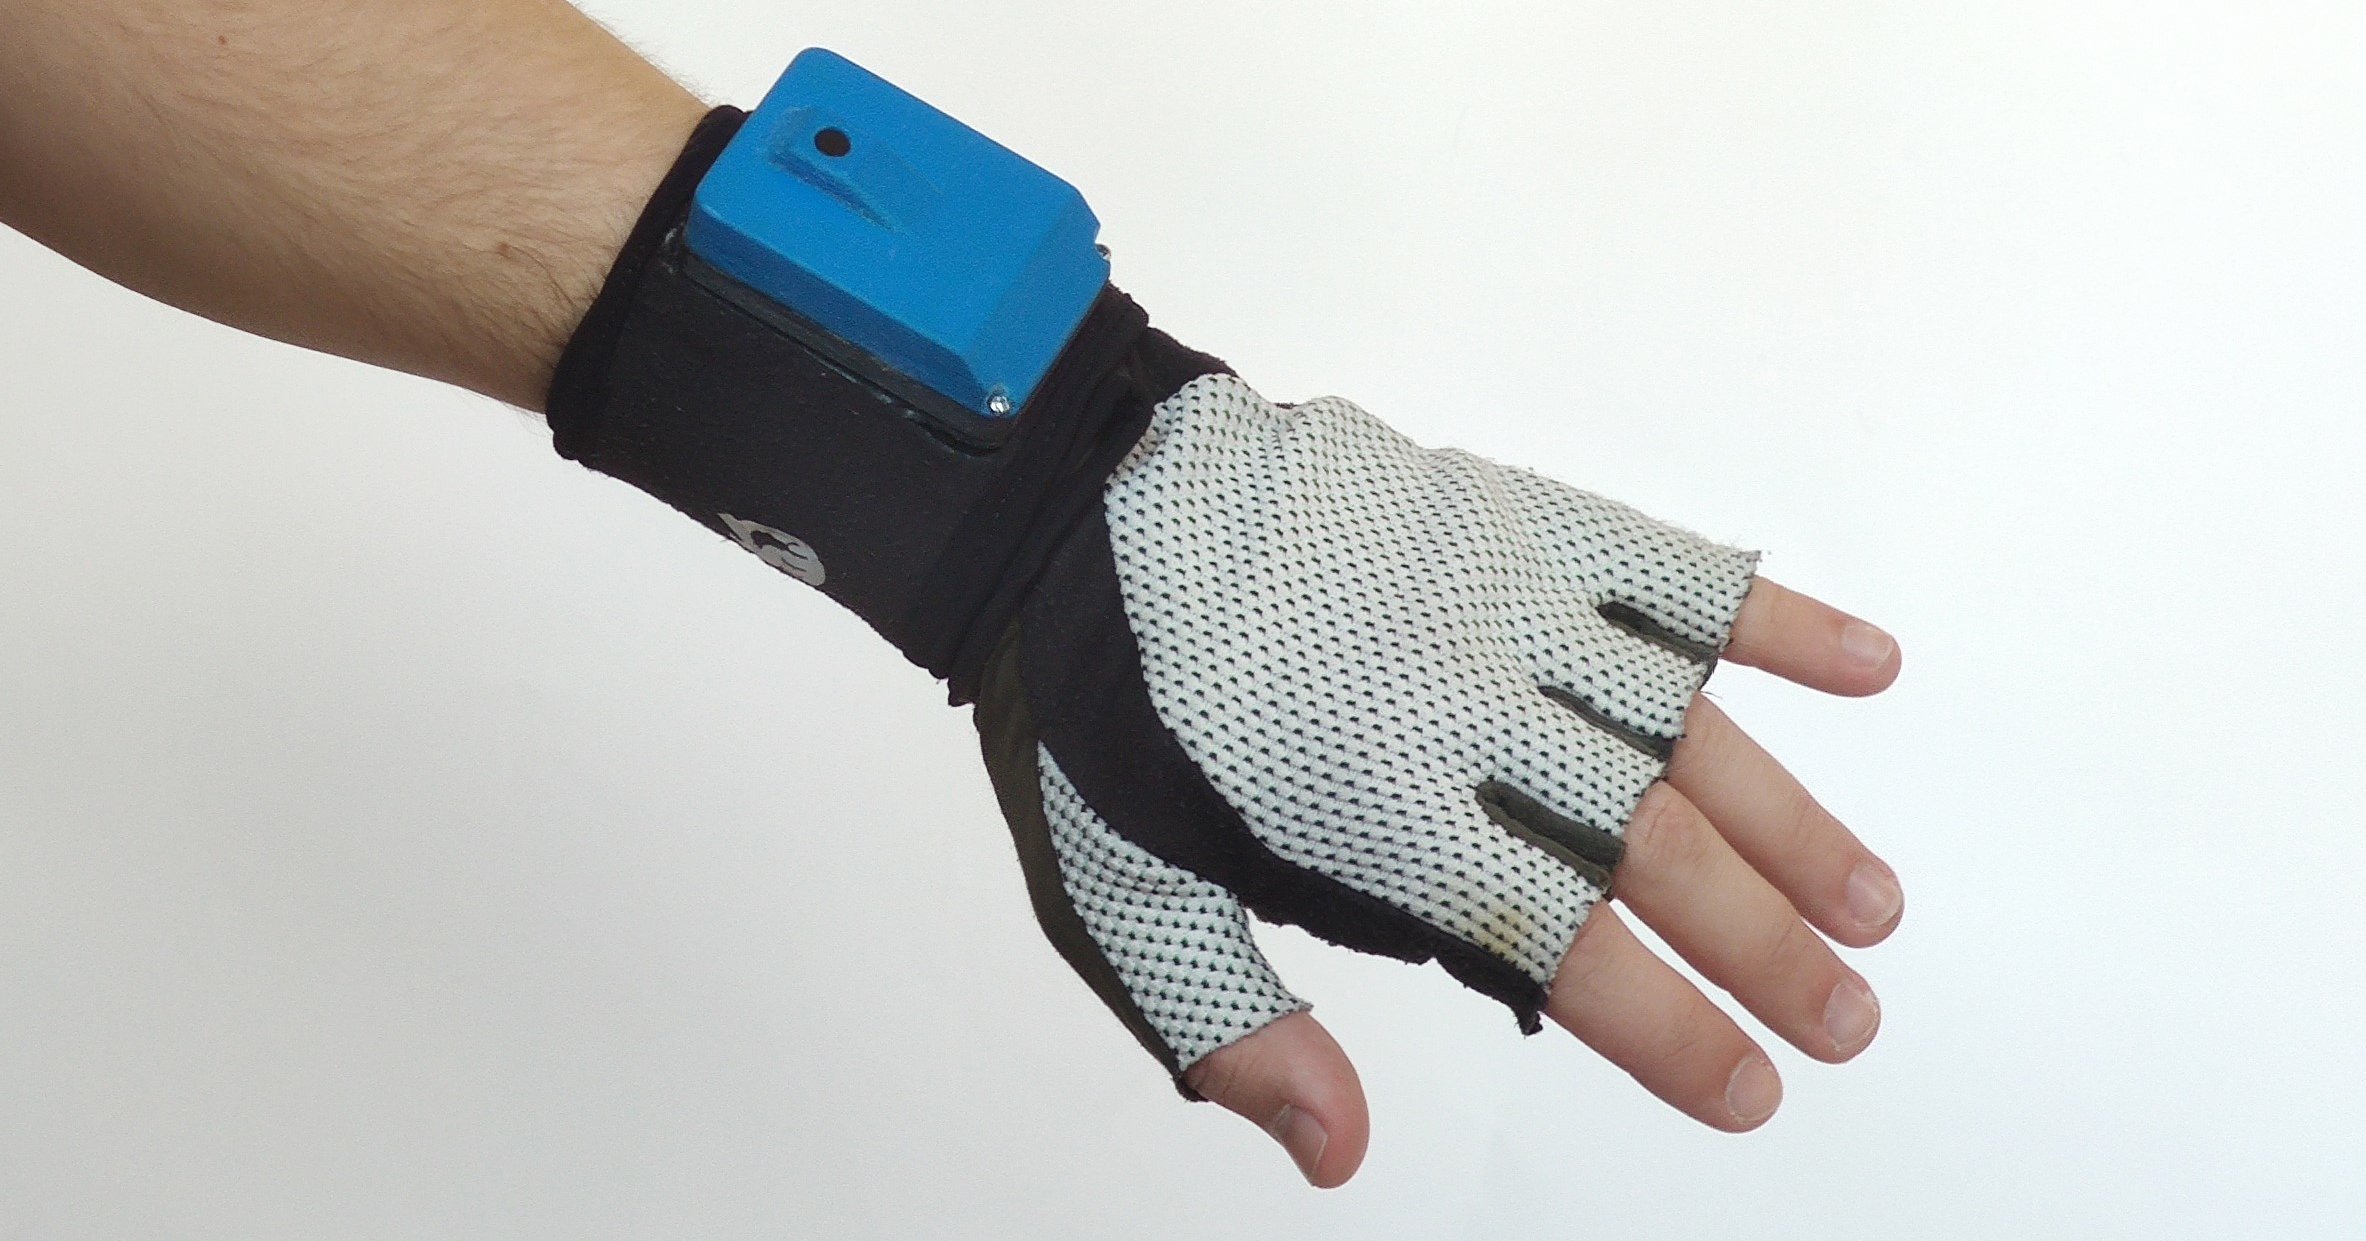 Grippy: Smart glove to help out PTSD patients